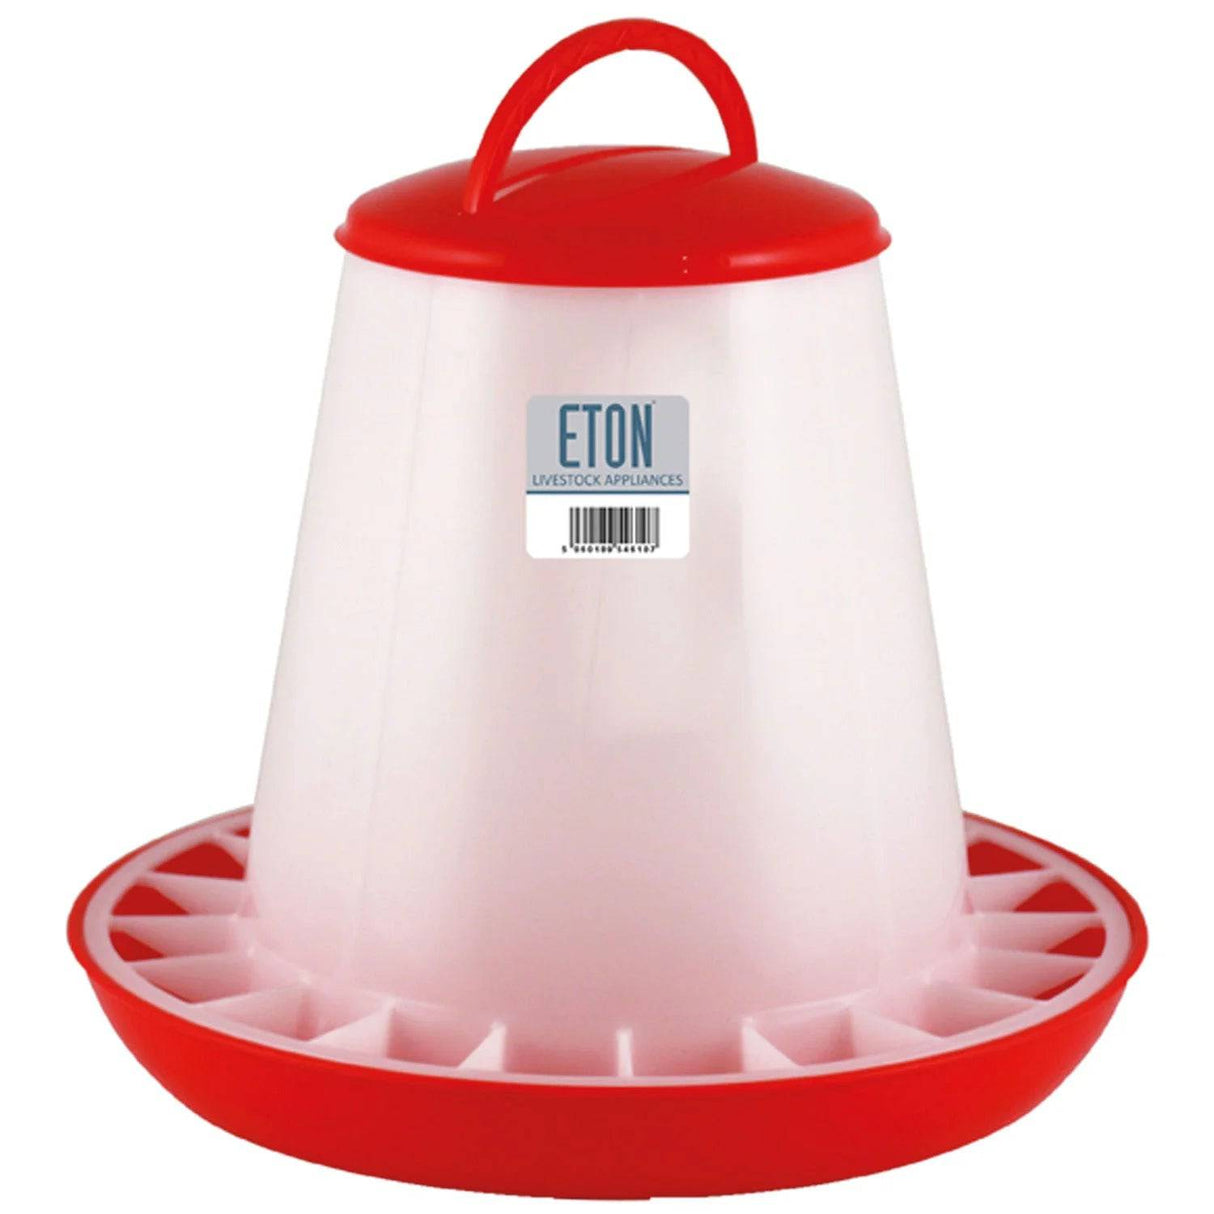 Eton TSF Poultry Feeder Red Poultry 1 Kg Barnstaple Equestrian Supplies